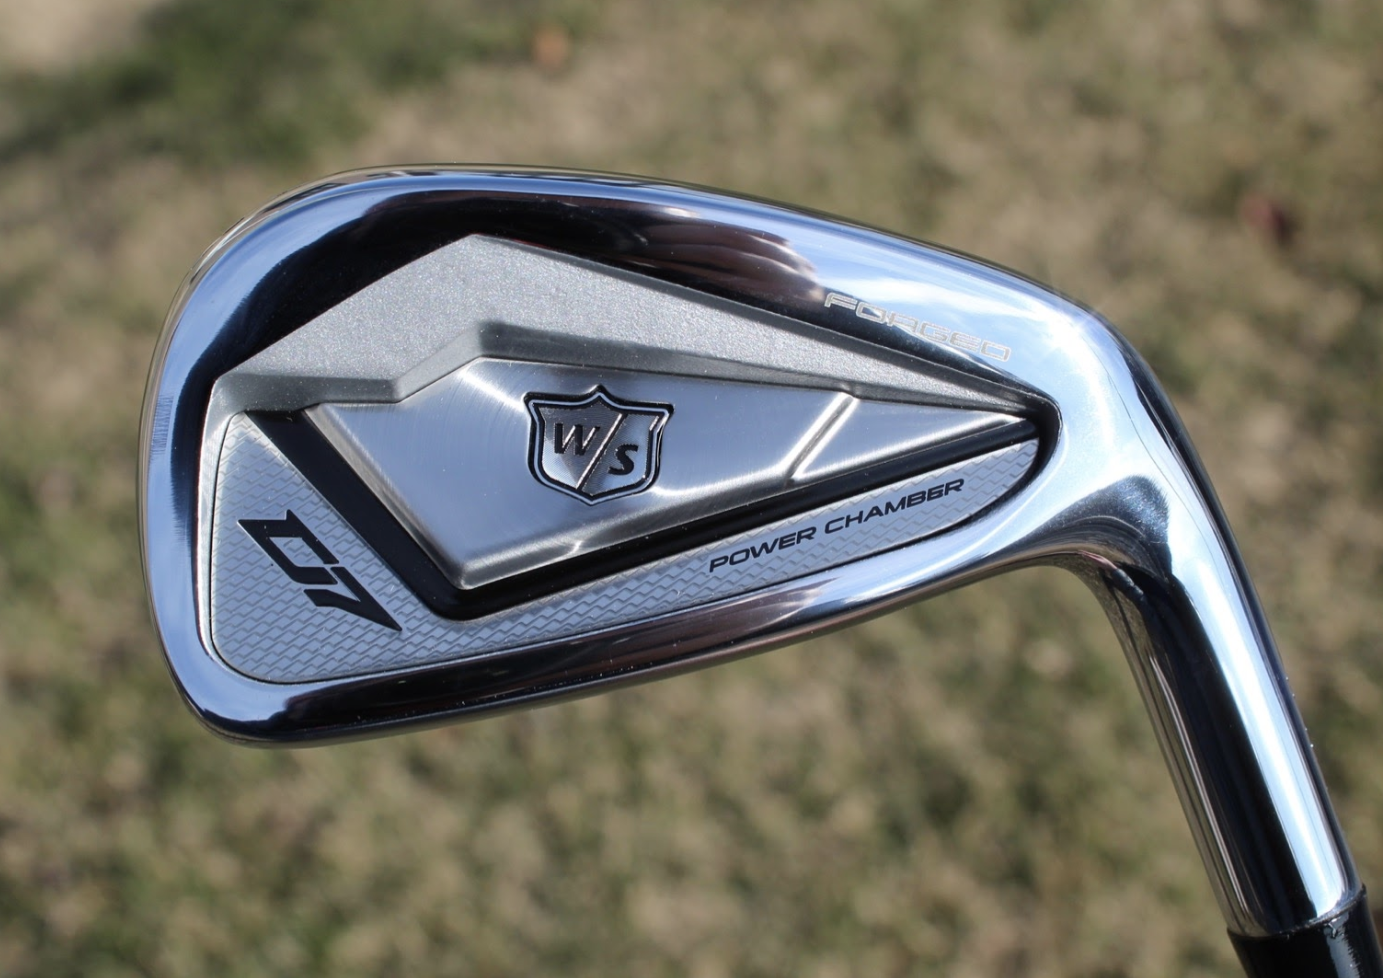 New 2020 Wilson Staff D7 Forged irons: Forged for all – GolfWRX